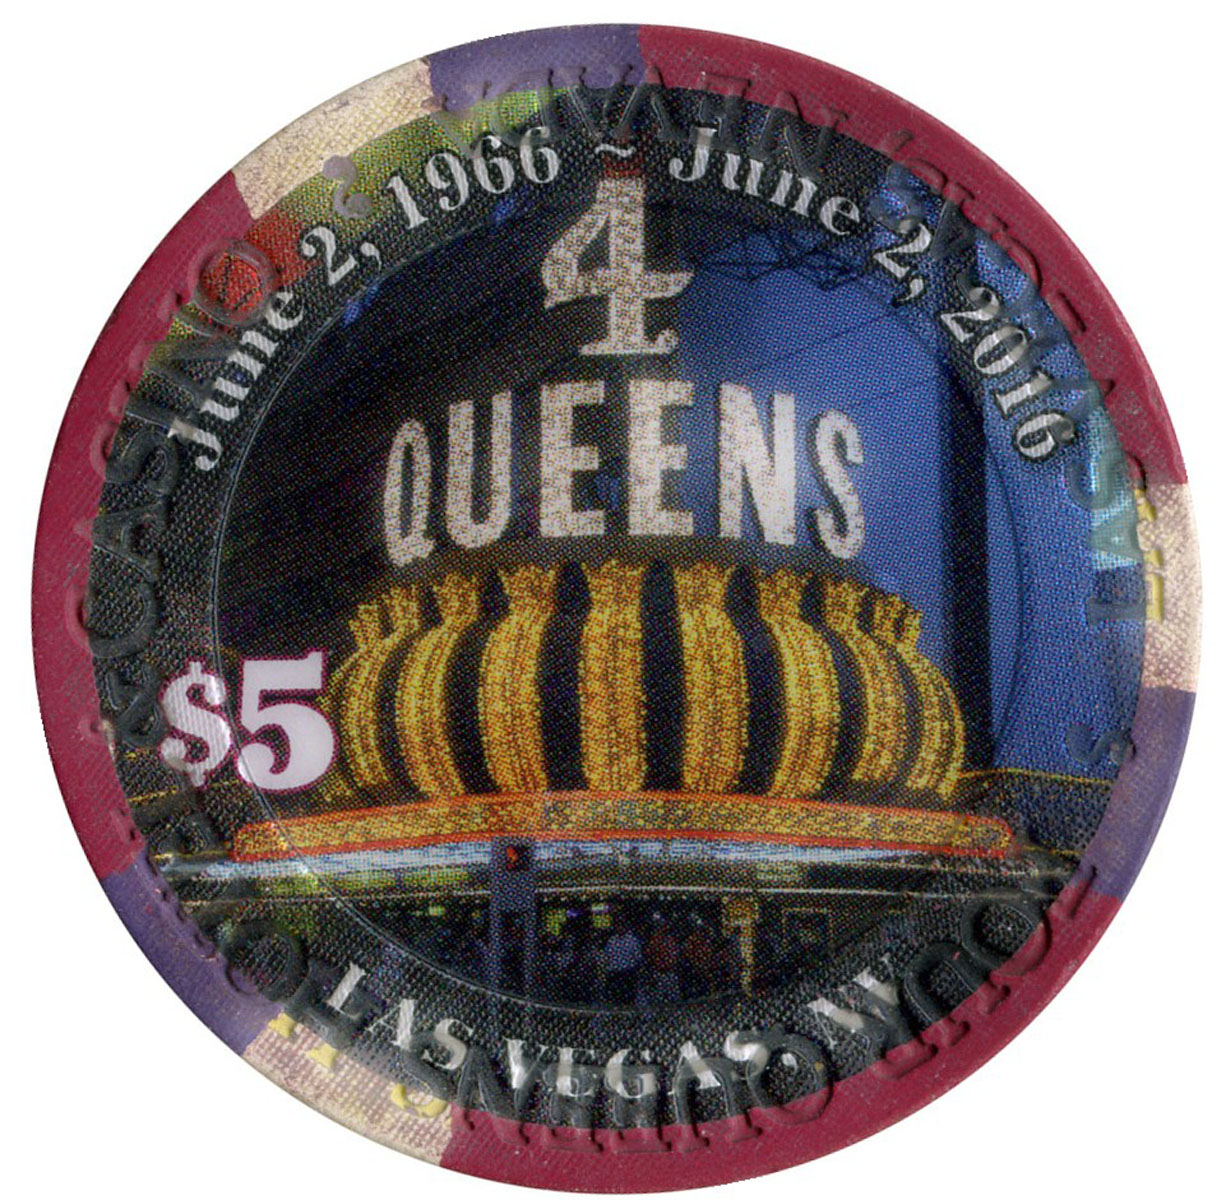 who owns the 4 queens casino